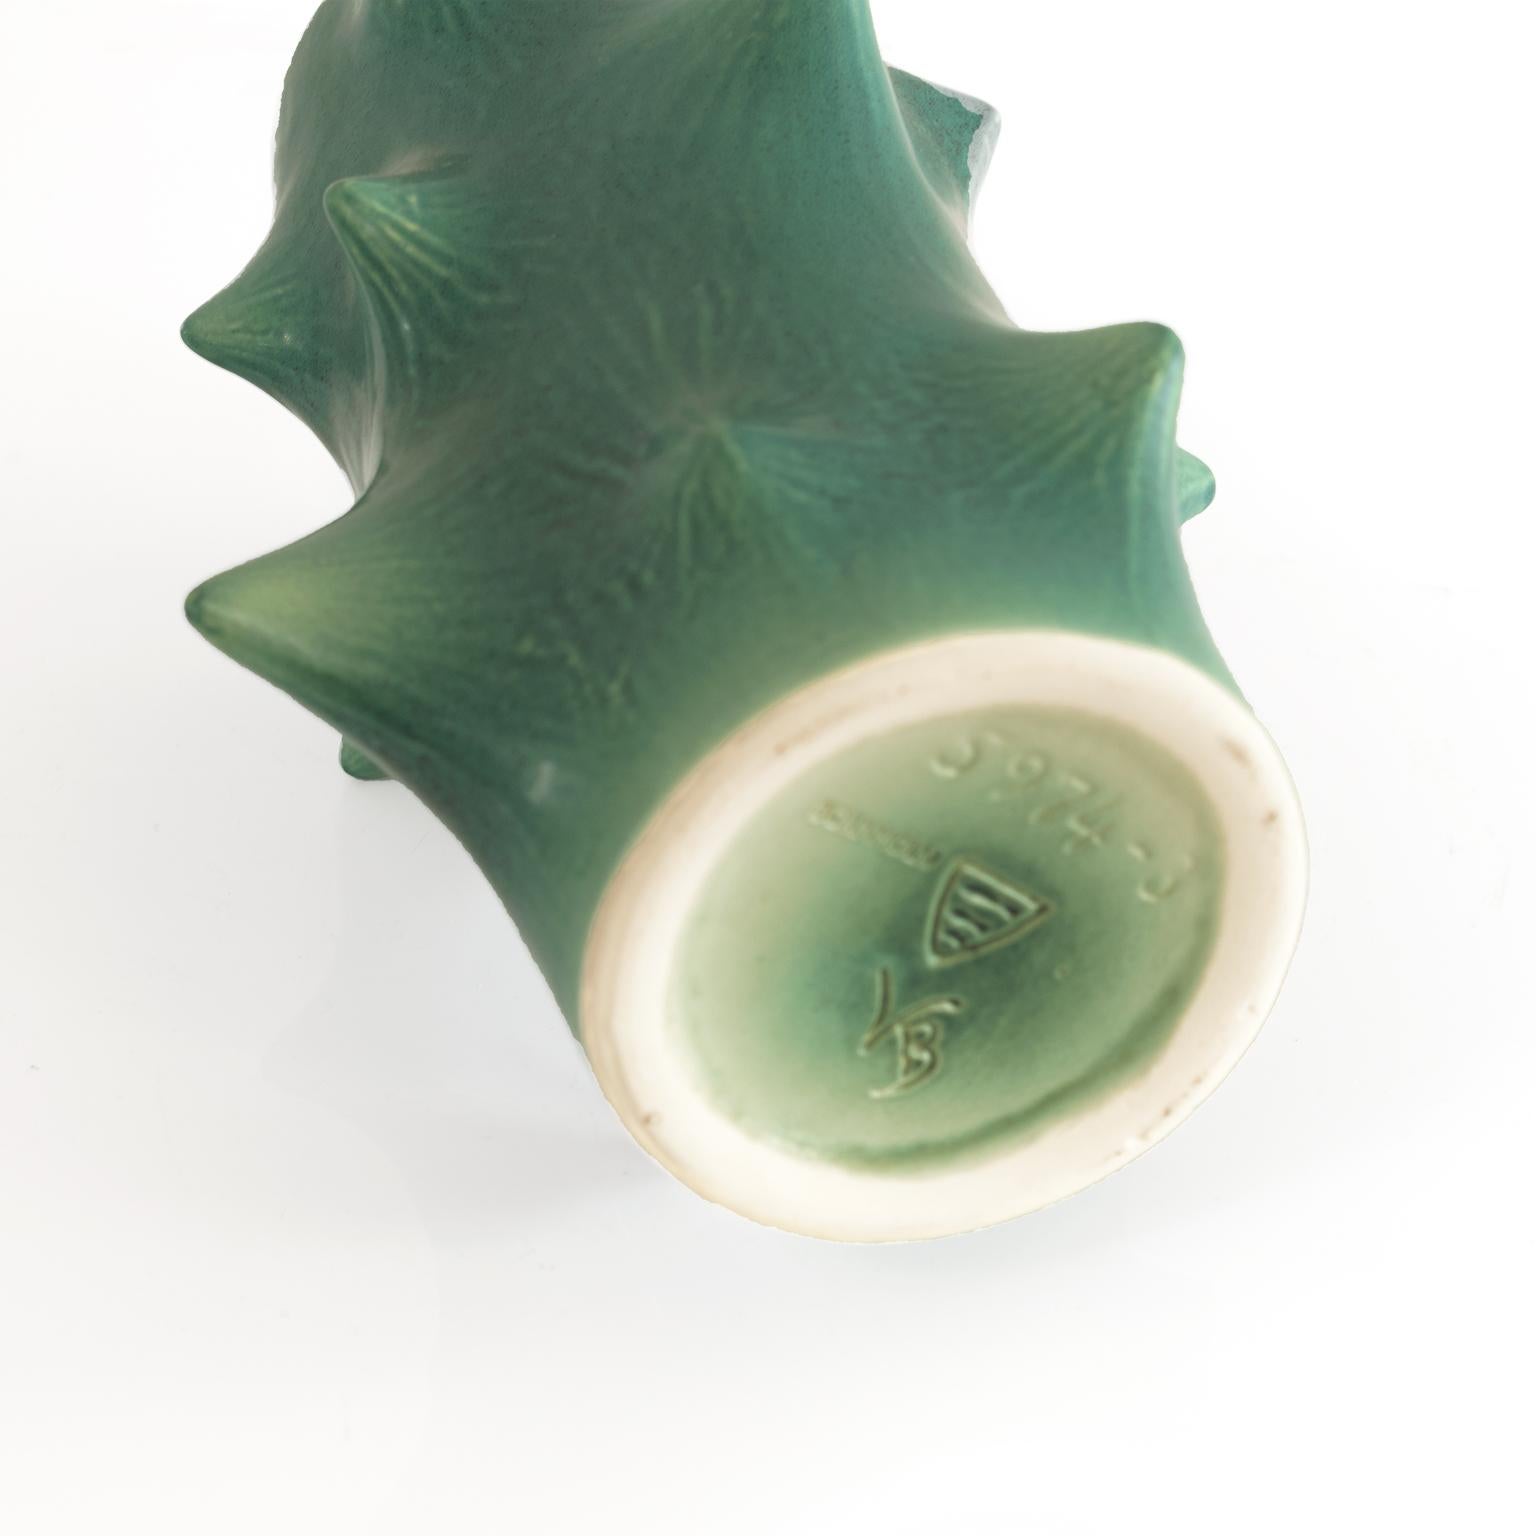 Scandinavian Modern "Rose Thorn" Vase by Knud Basse, Michael Andersen and  Sons. For Sale at 1stDibs